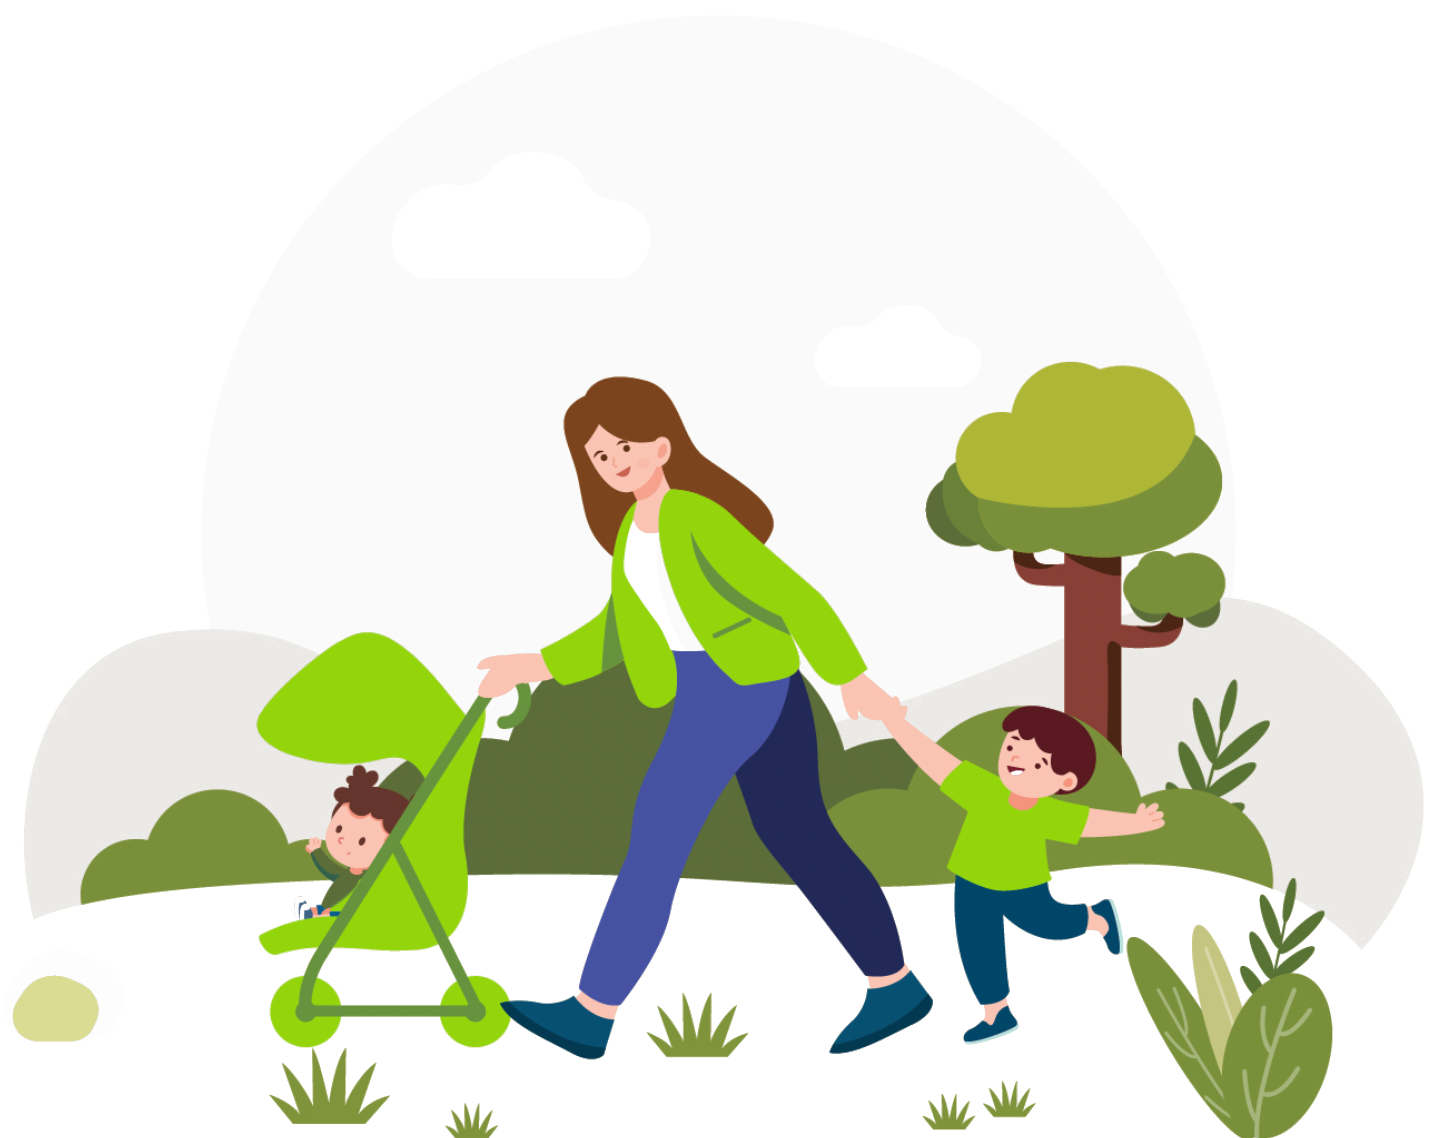 graphic of women and her kids walking through the park smiling wearing chike green clothes